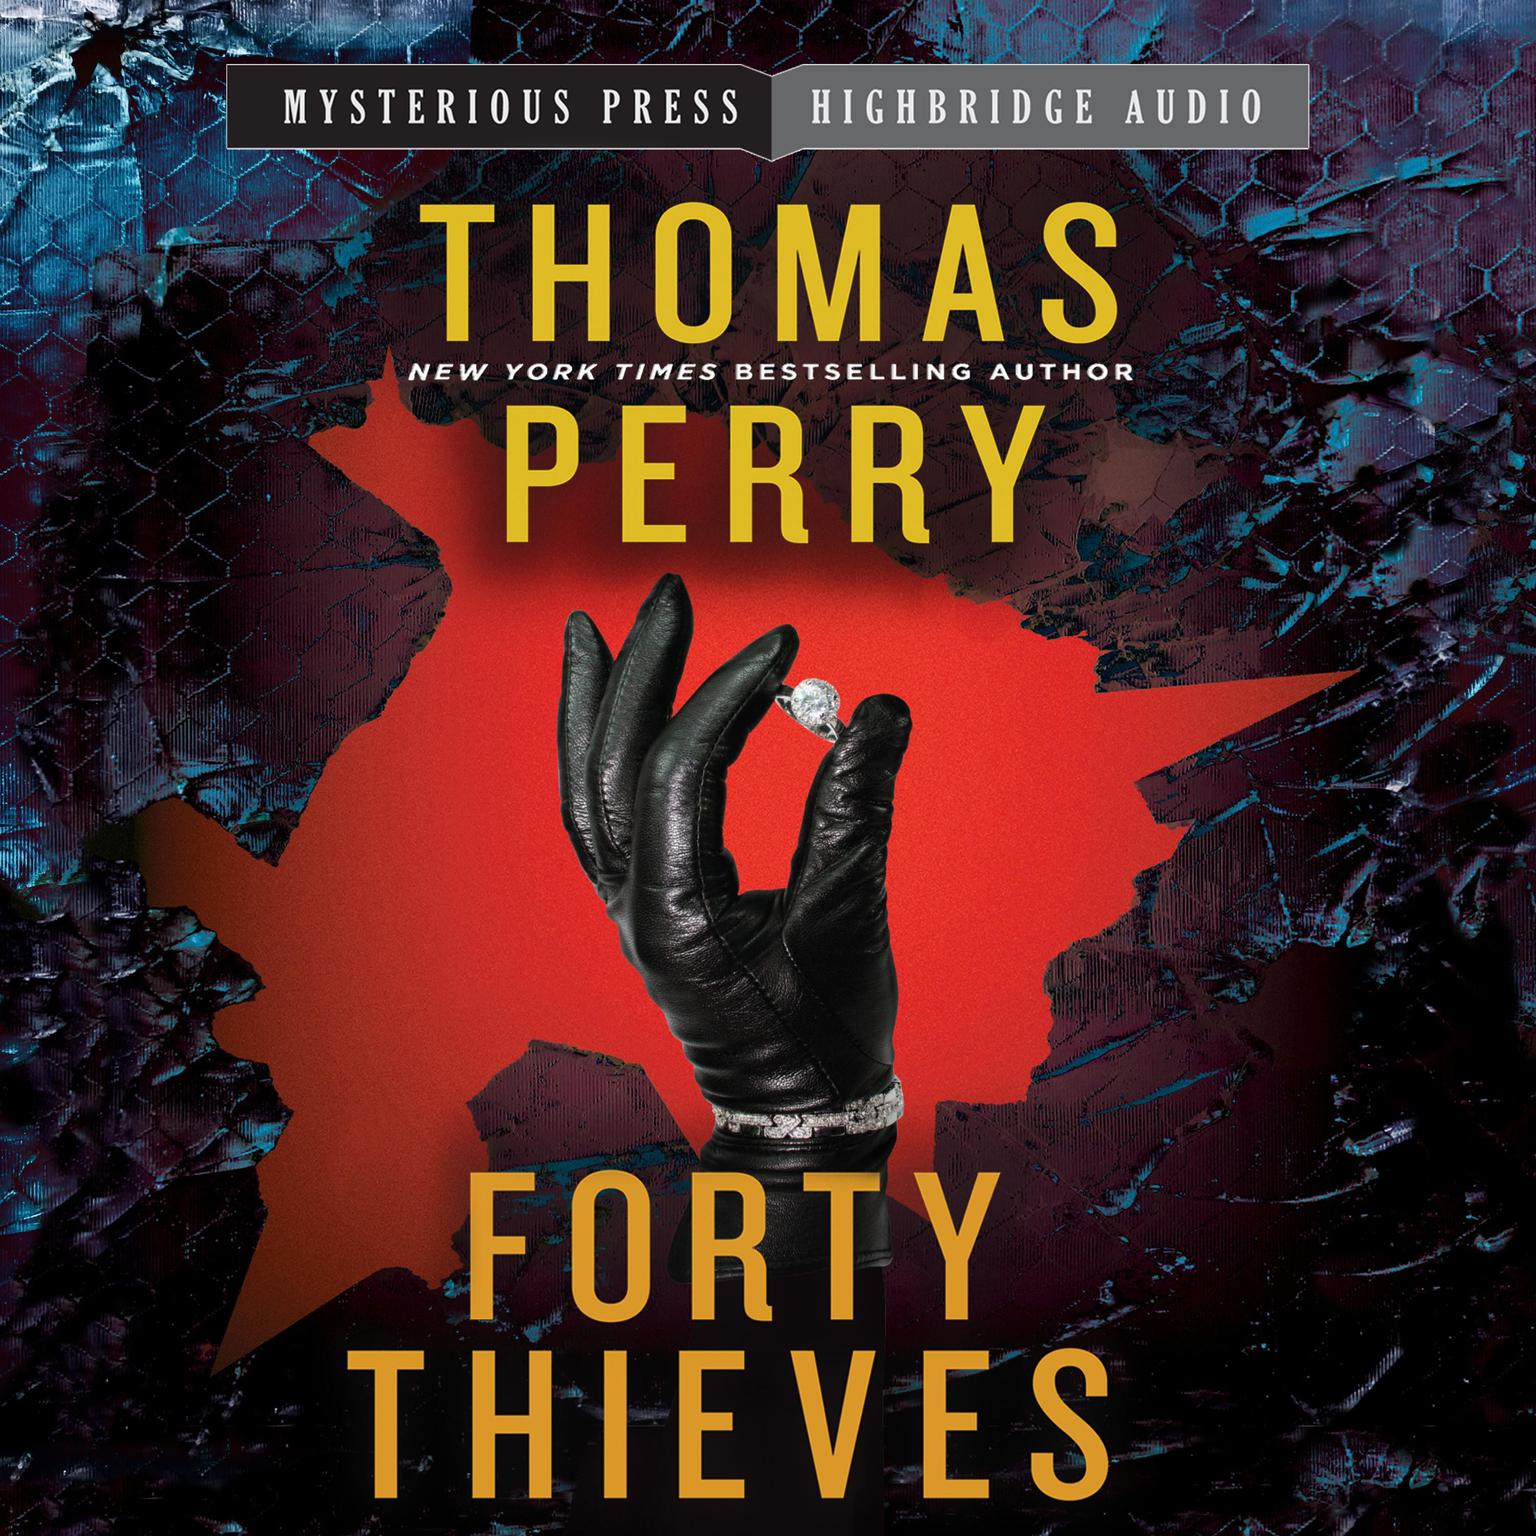 Forty Thieves Audiobook, by Thomas Perry